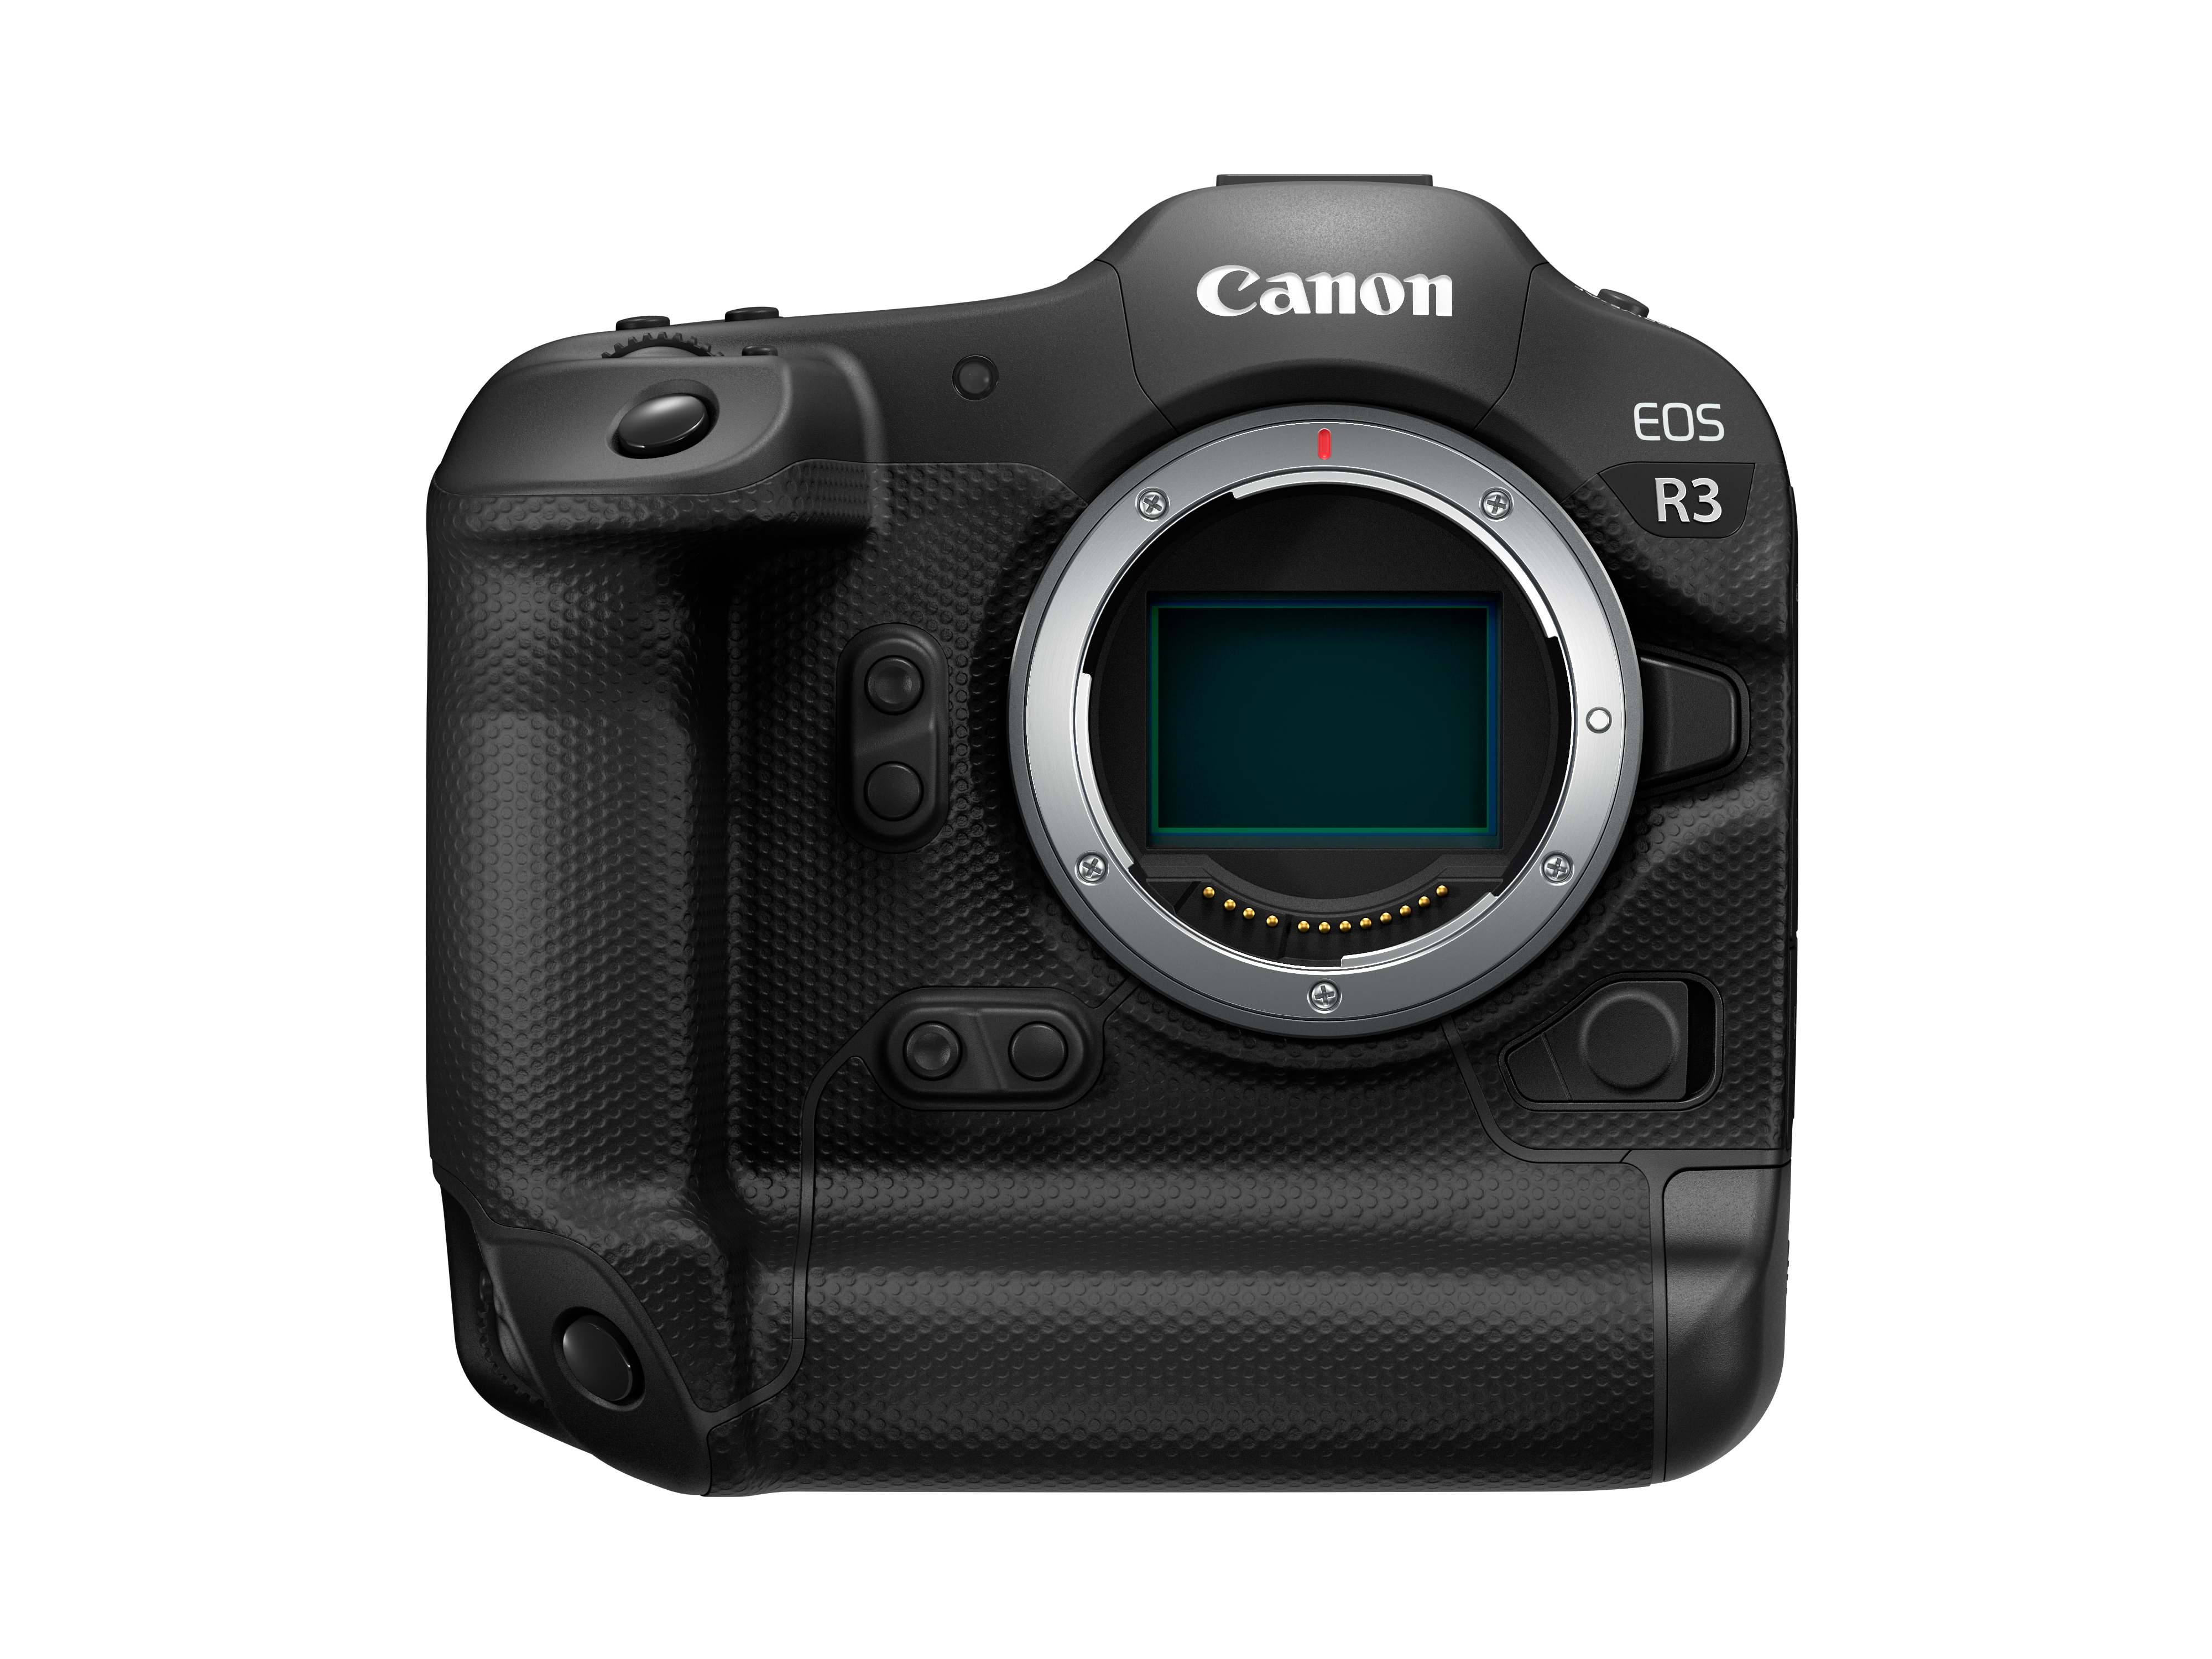 canon Eos r3 front view